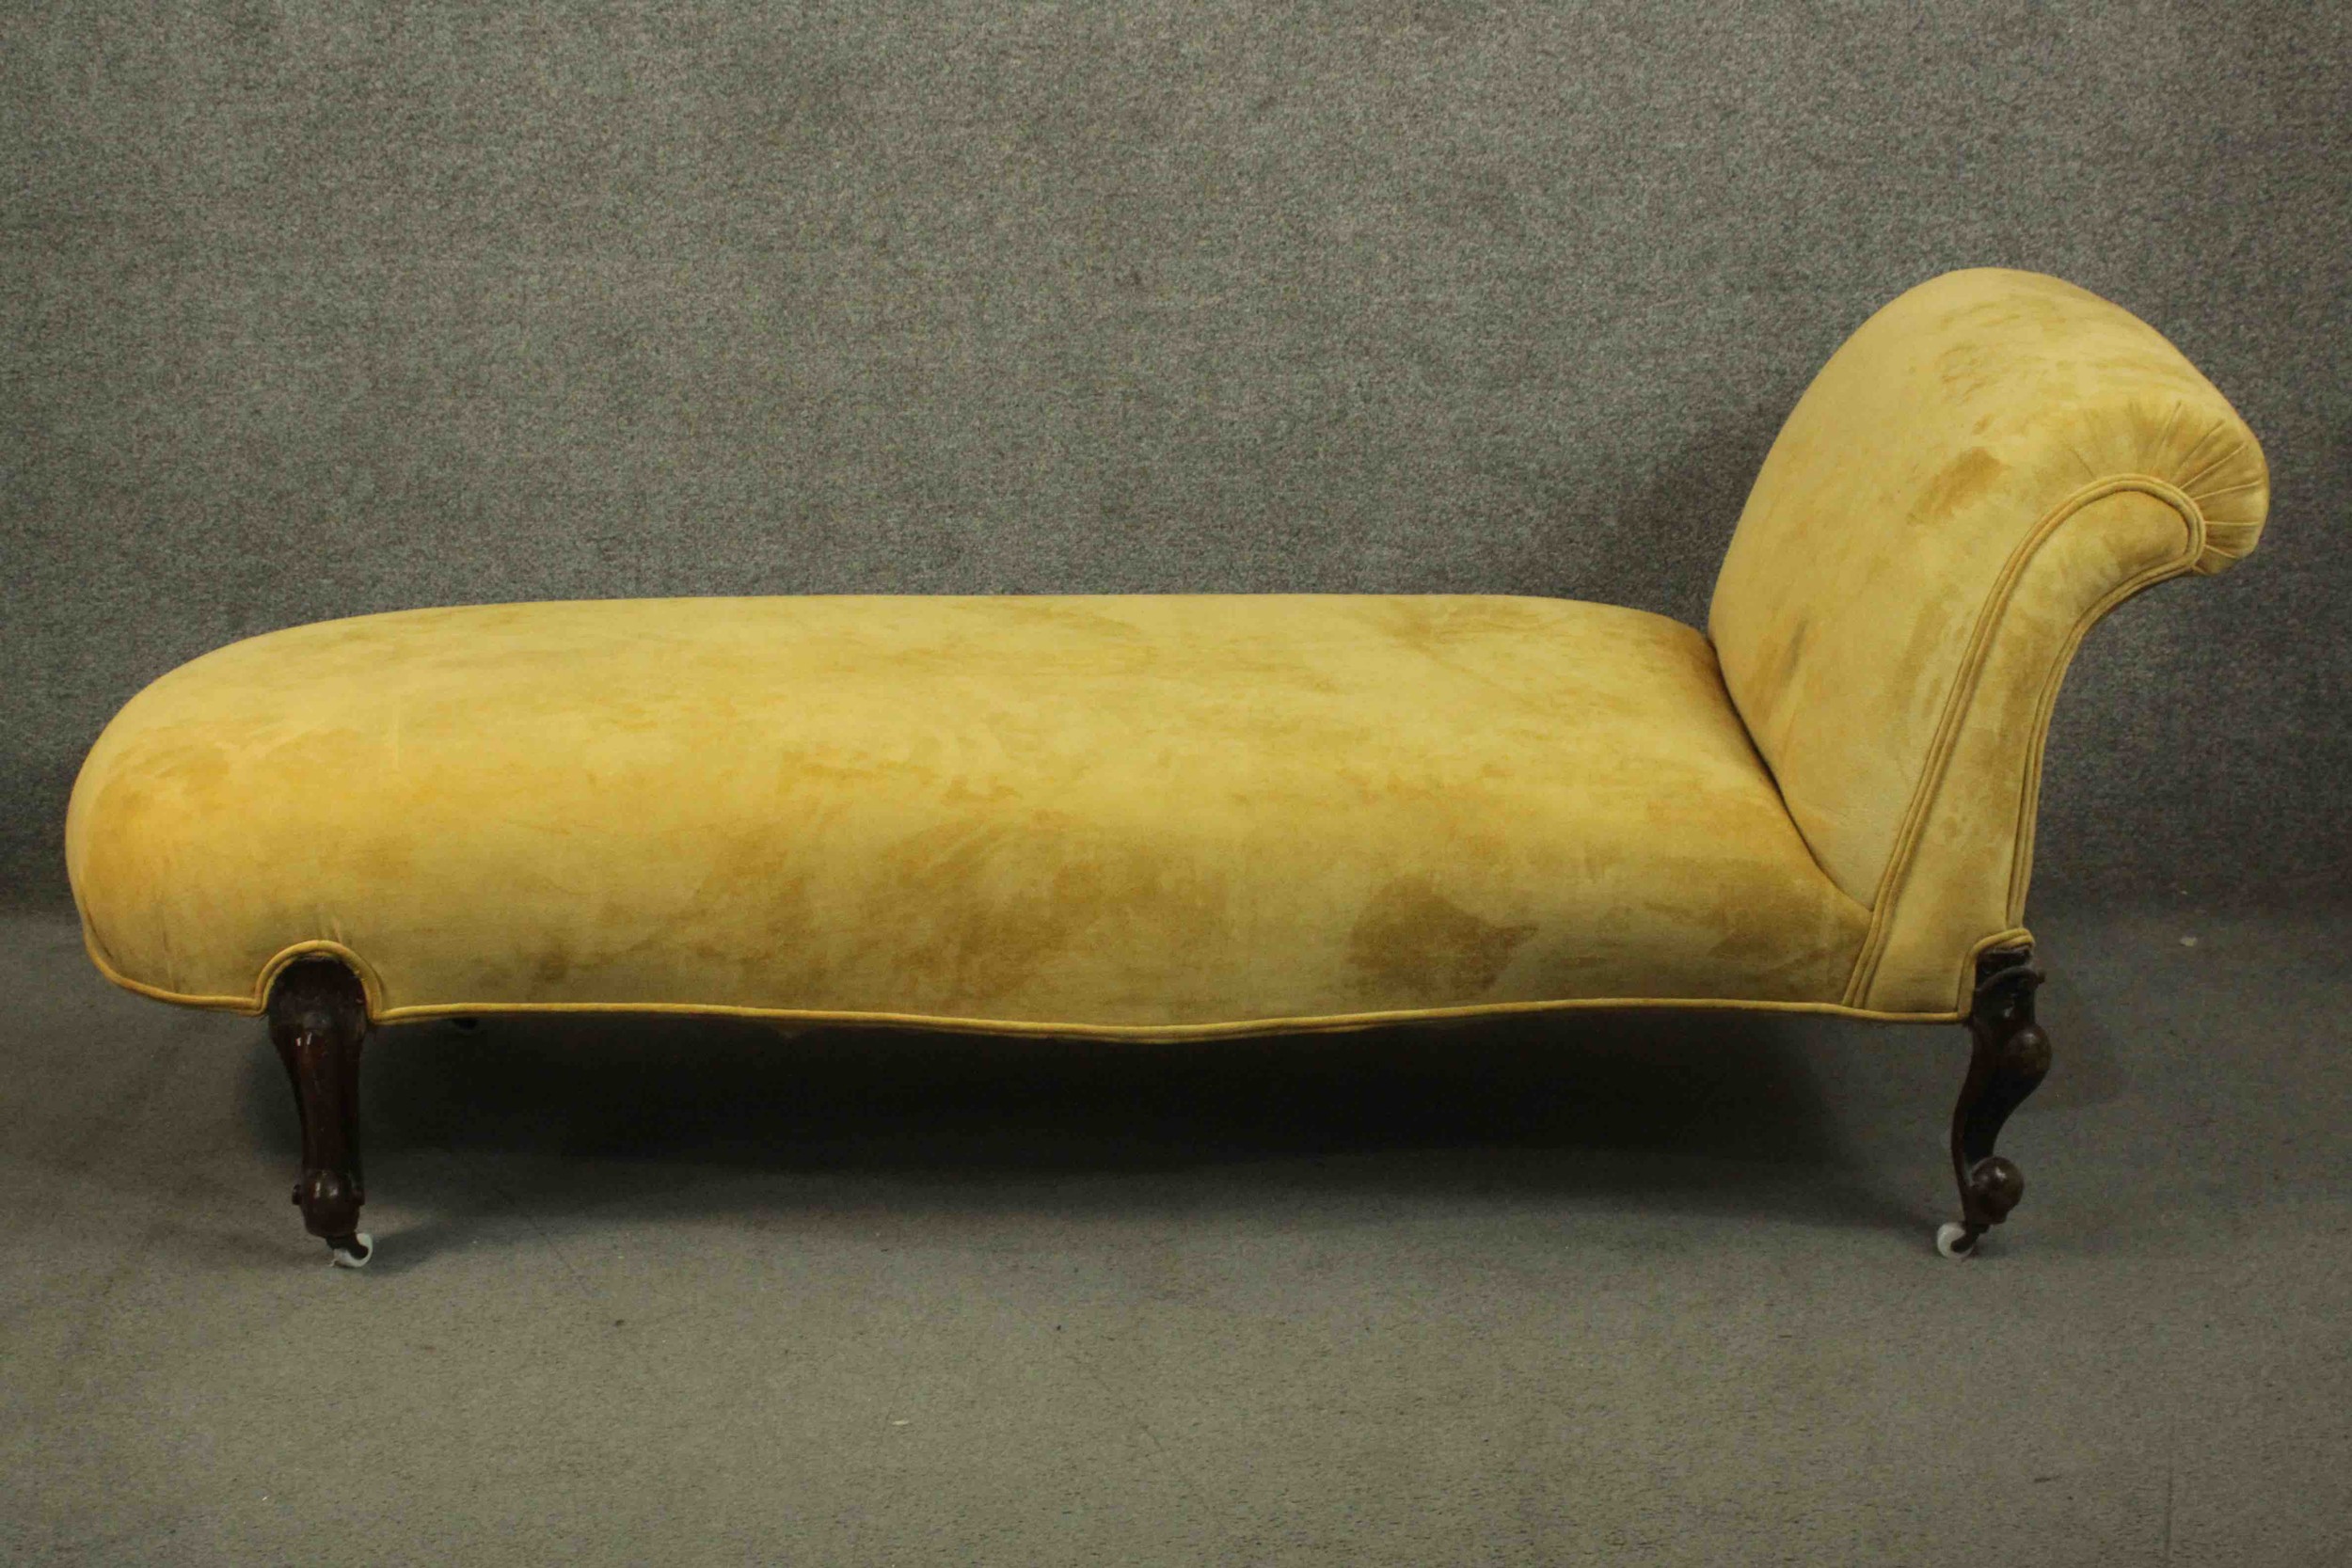 A Victorian mahogany chaise longue, upholstered in yellow fabric, on cabriole legs. H.80 W.100 D.